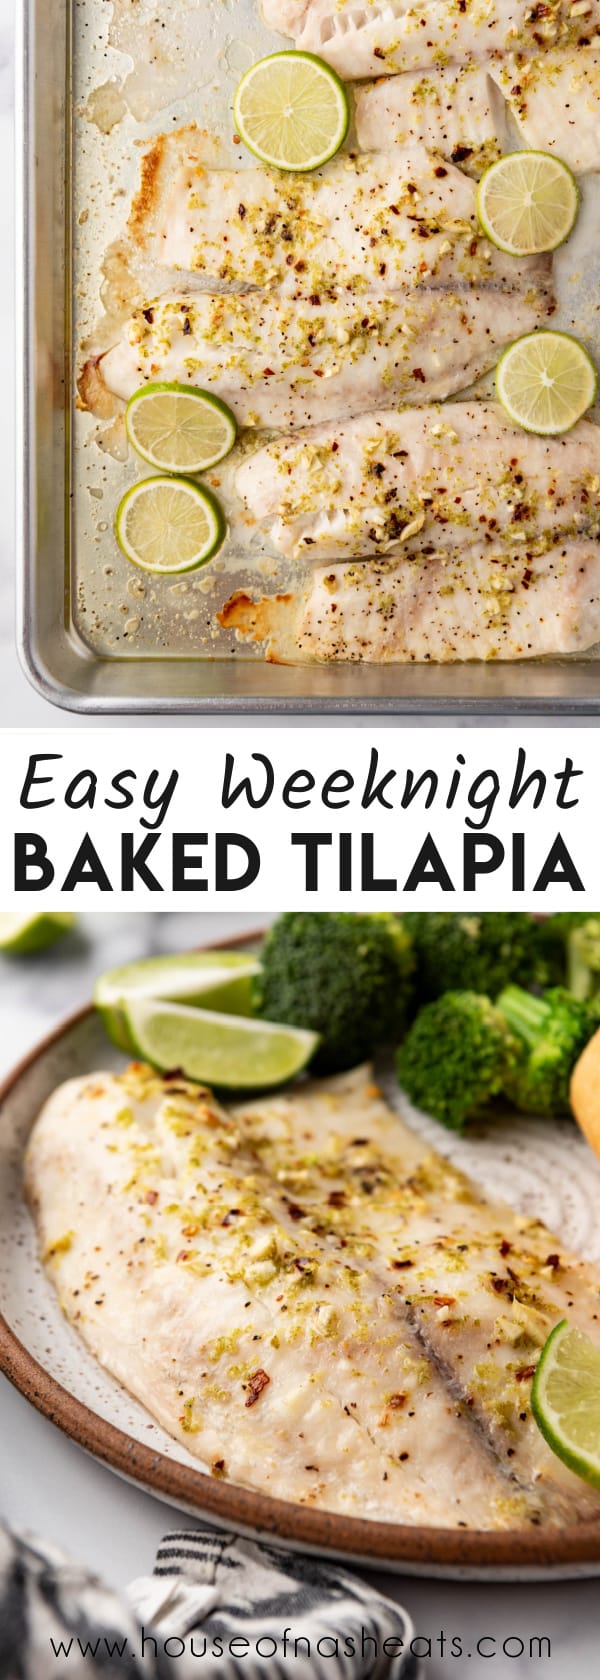 A collage of images of baked tilapia with text overlay.